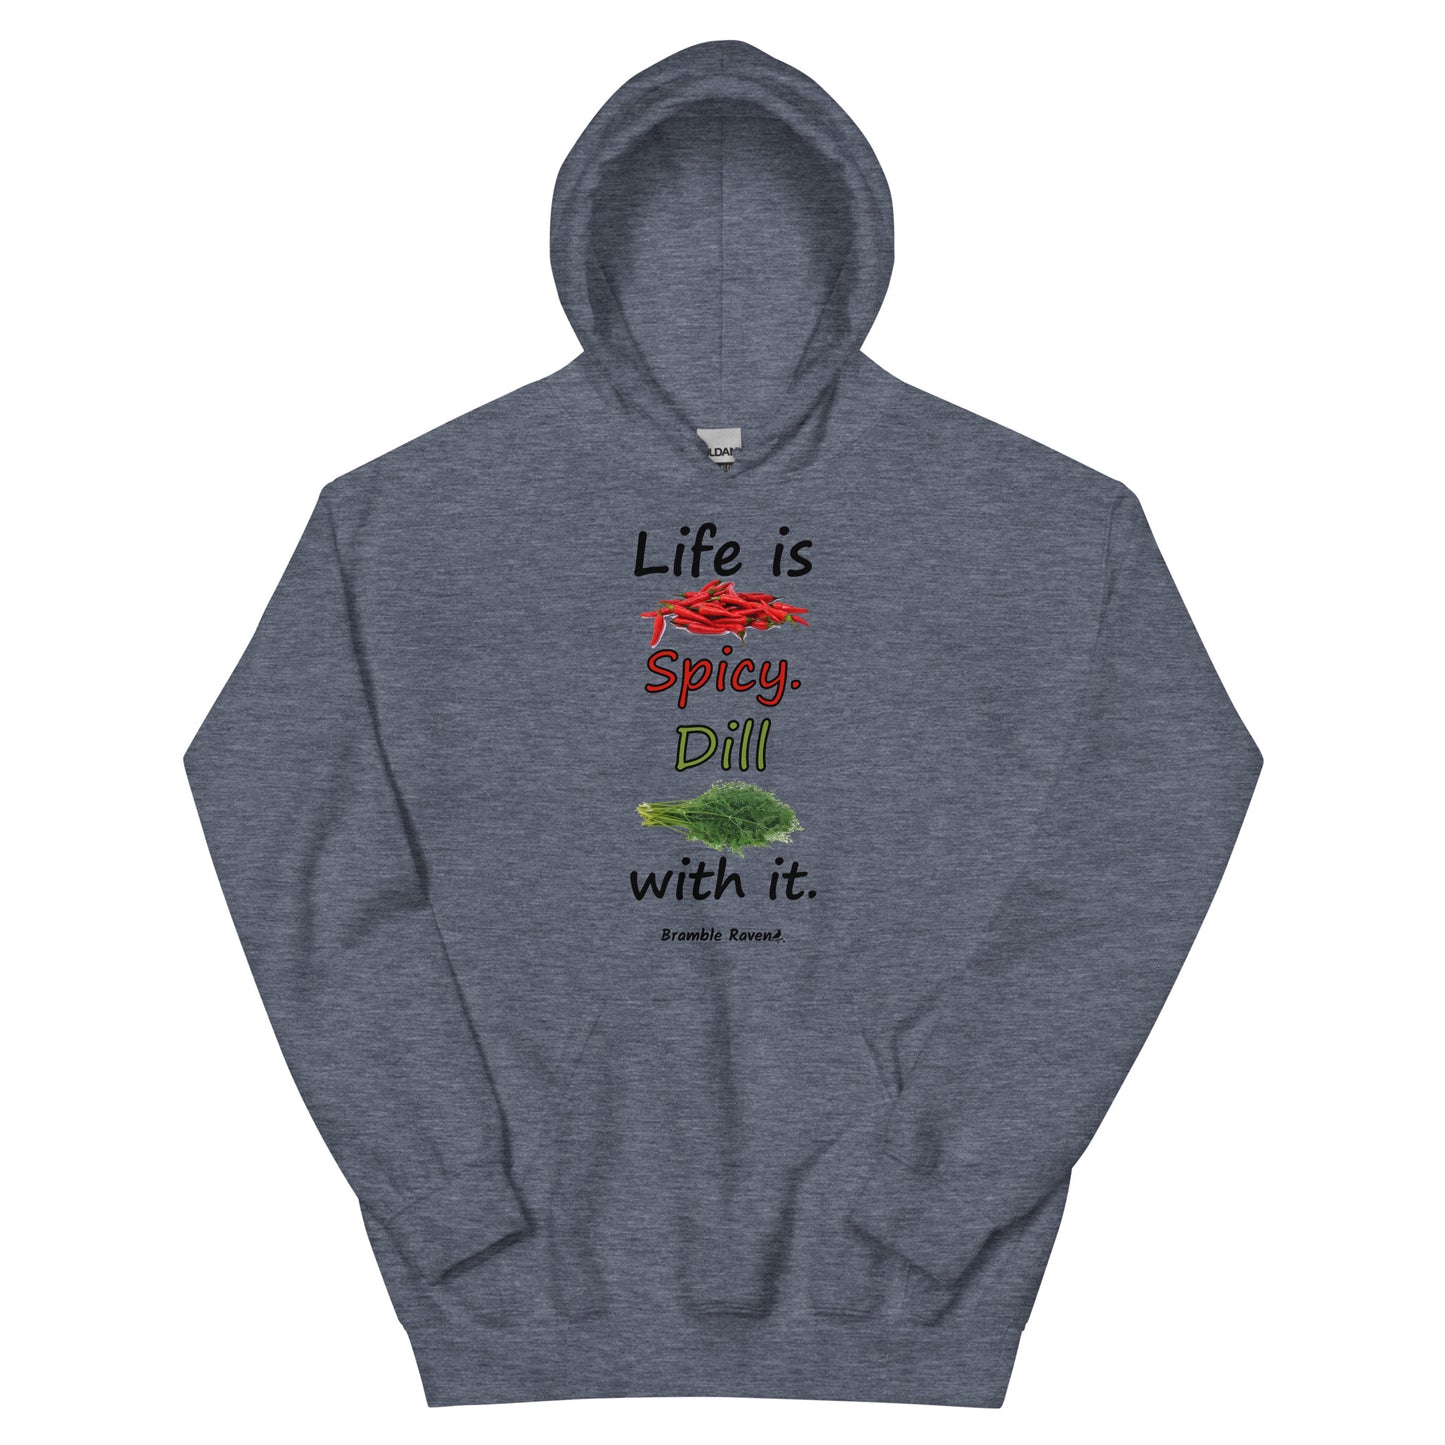 Heather dark grey colored unisex heavy blend hoodie.  Double lined hood, matching drawcord, front pouch pocket. Rib knit cuffs and waistband. Features text and image: Life is spicy. Dill with it. 